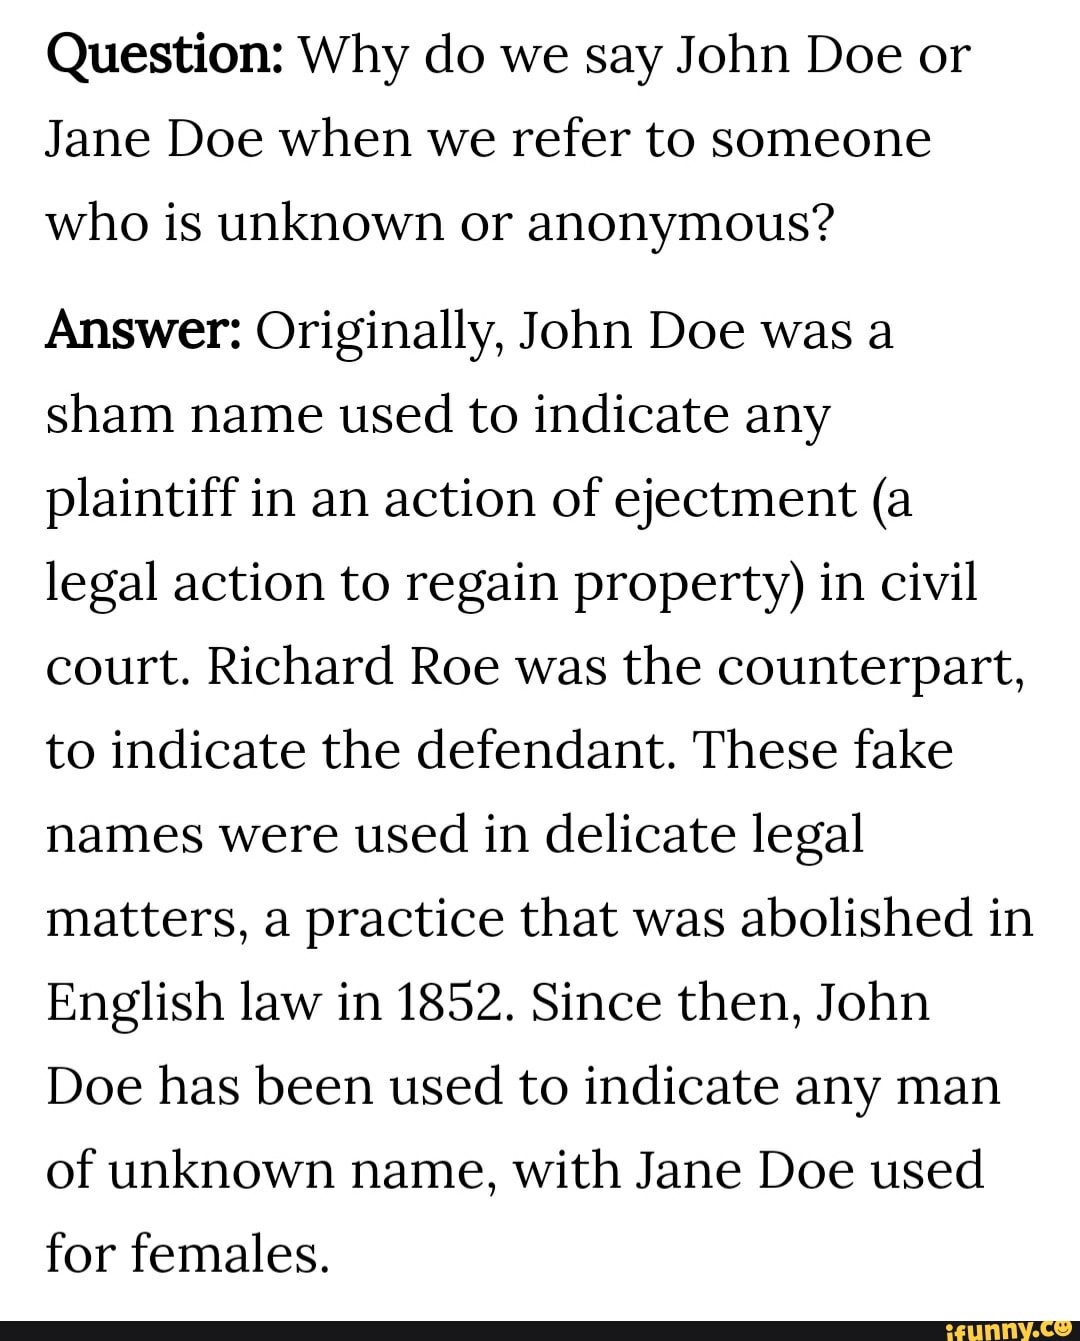 THE REAL TRUTH BEHIND JOHN DOE AND JANE DOE!!